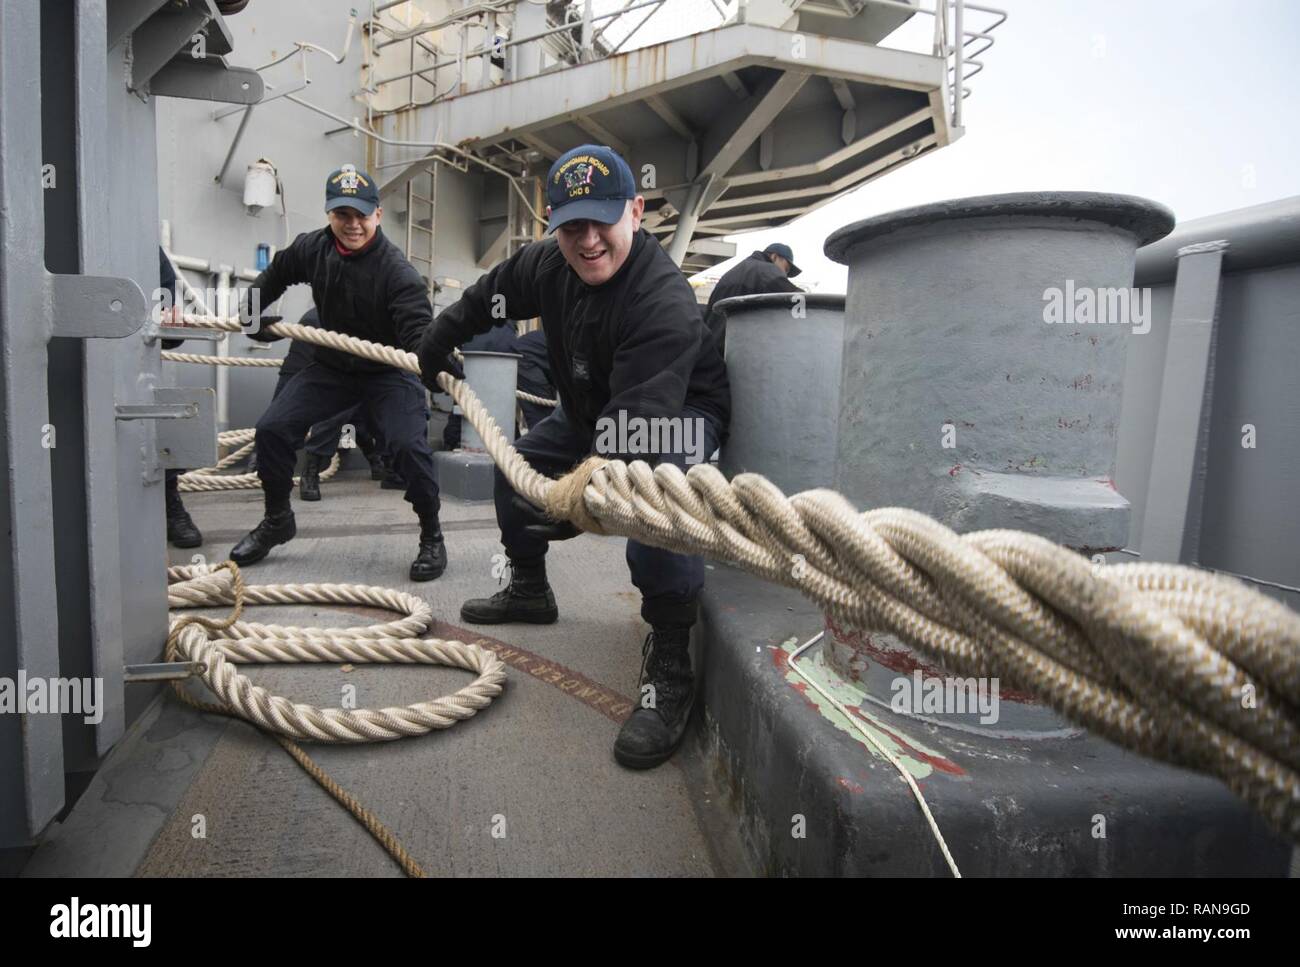 SASEBO, Japan (Feb. 27, 2017) Boatswain's Mate 2nd Class Jose Garcia  (center), from Chicago, and Aviation Ordnanceman Airman Steve Sarsaba, from  Waukegan, Ill., heave a mooring line on the fantail of amphibious